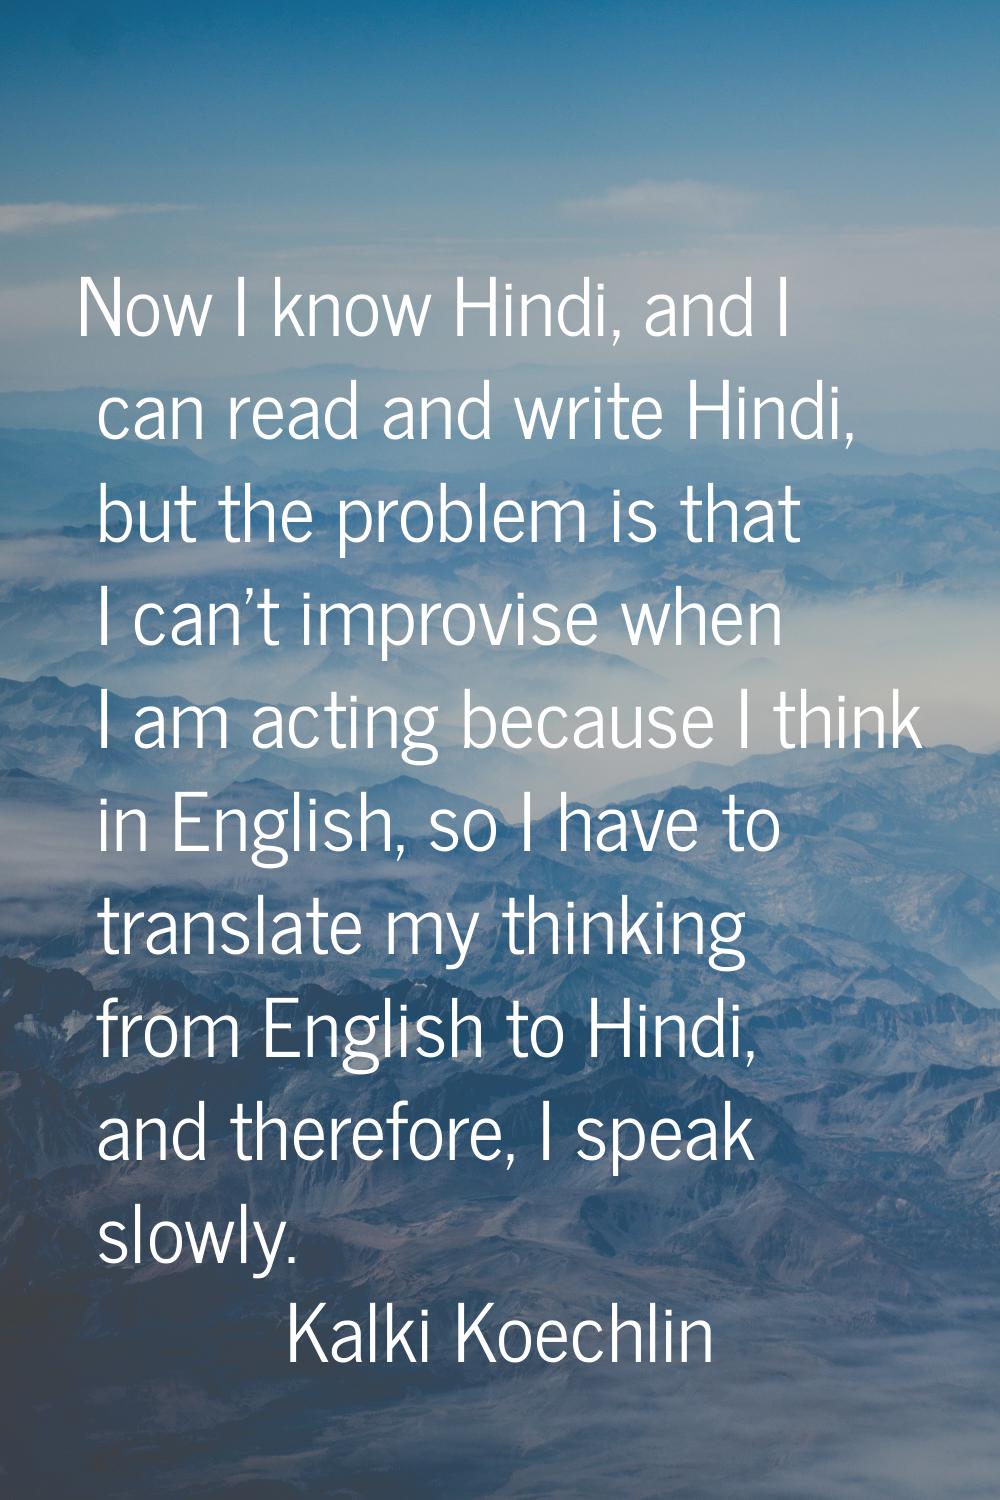 Now I know Hindi, and I can read and write Hindi, but the problem is that I can't improvise when I 